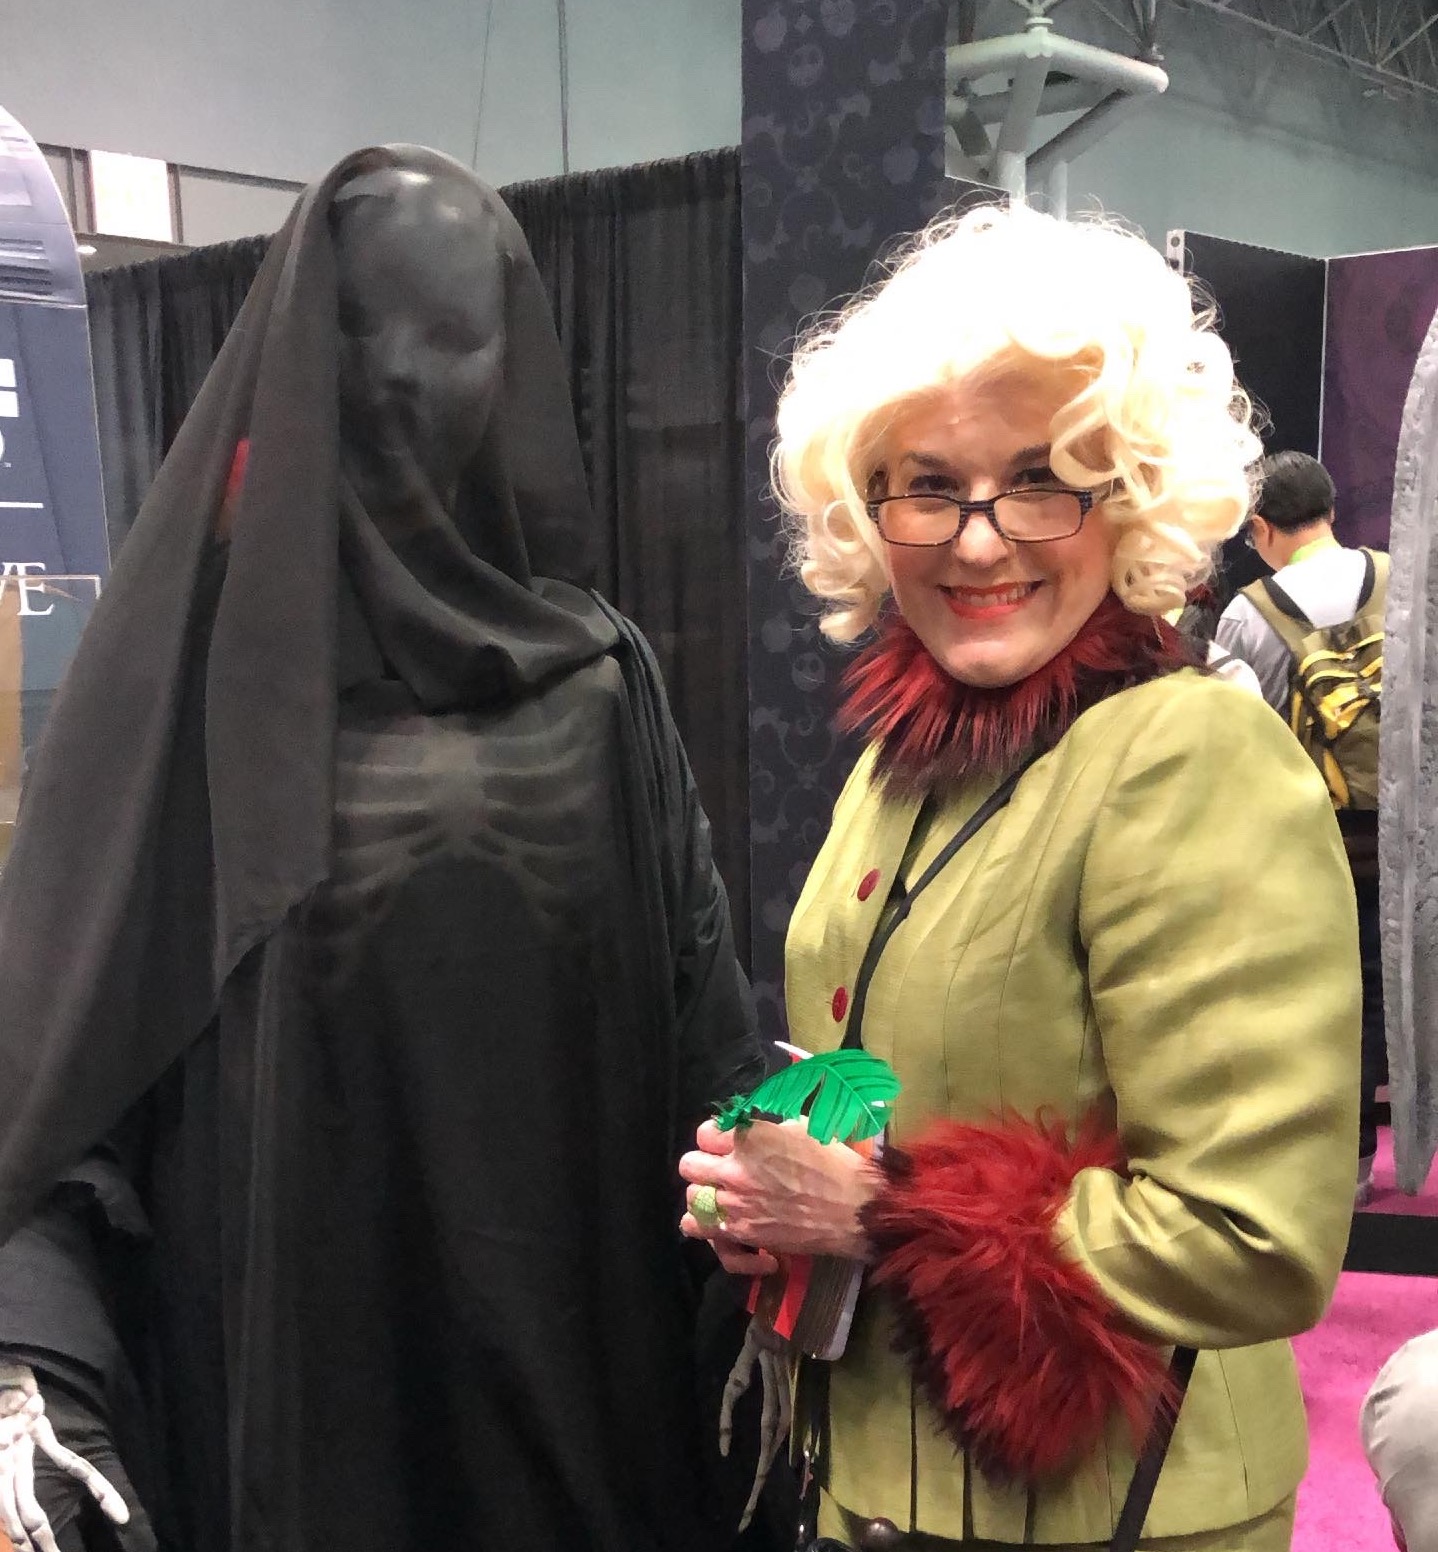 A mother/daughter team cosplaying as Rita Skeeter and a Dementor at New York Comic Con 2019!